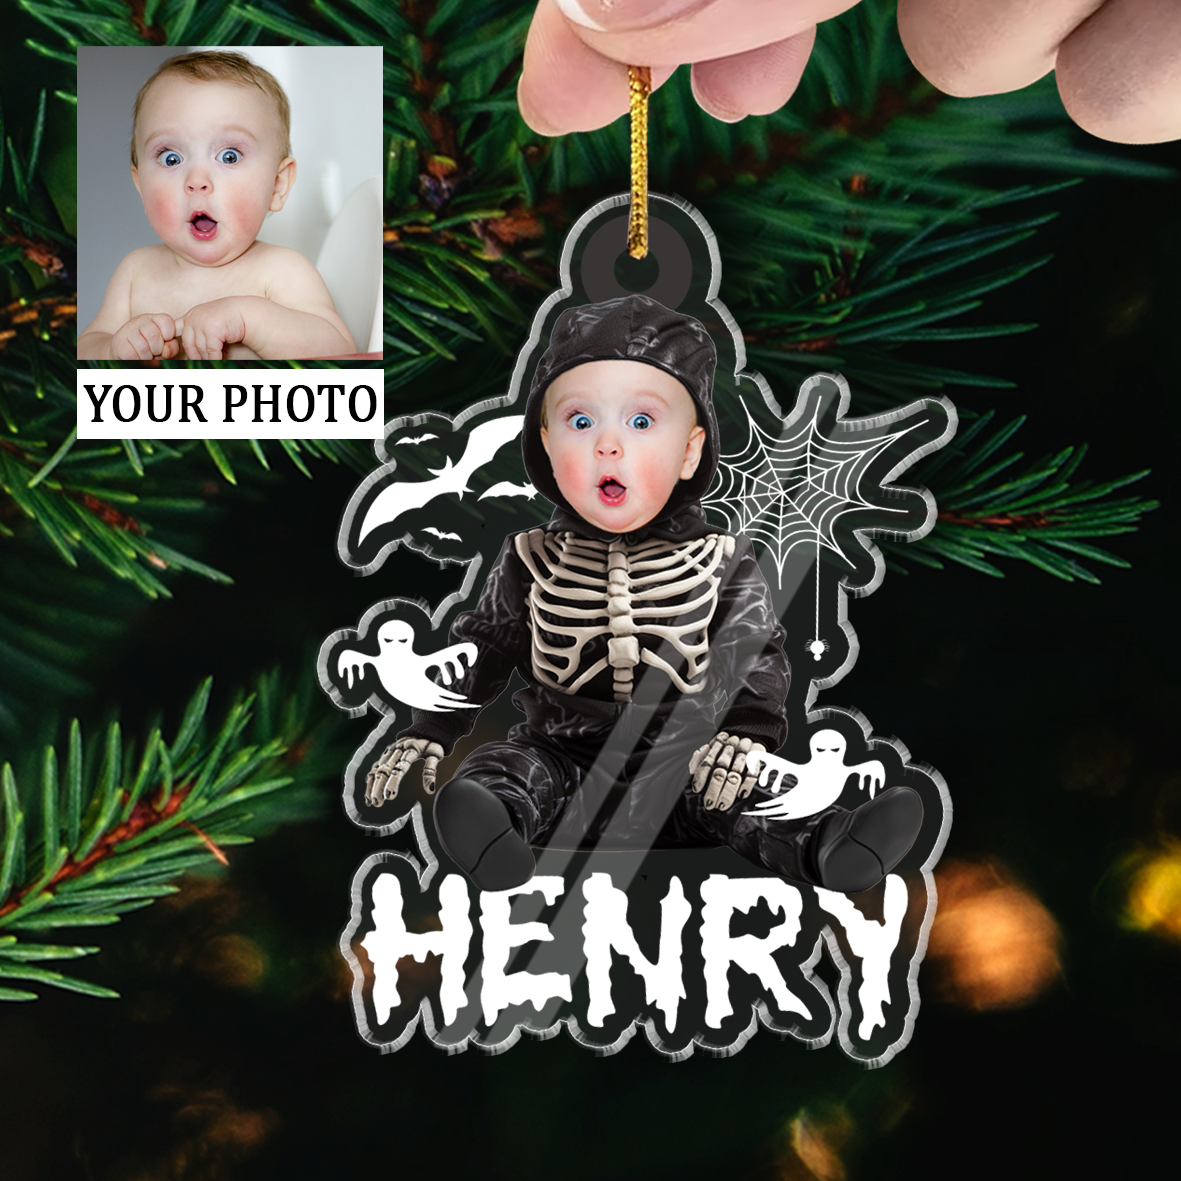 Halloween Ornaments With Customized Name And Face, Custom Shape Acrylic Ornaments Gifts For Son, Daughter, Grandson, Granddaughter